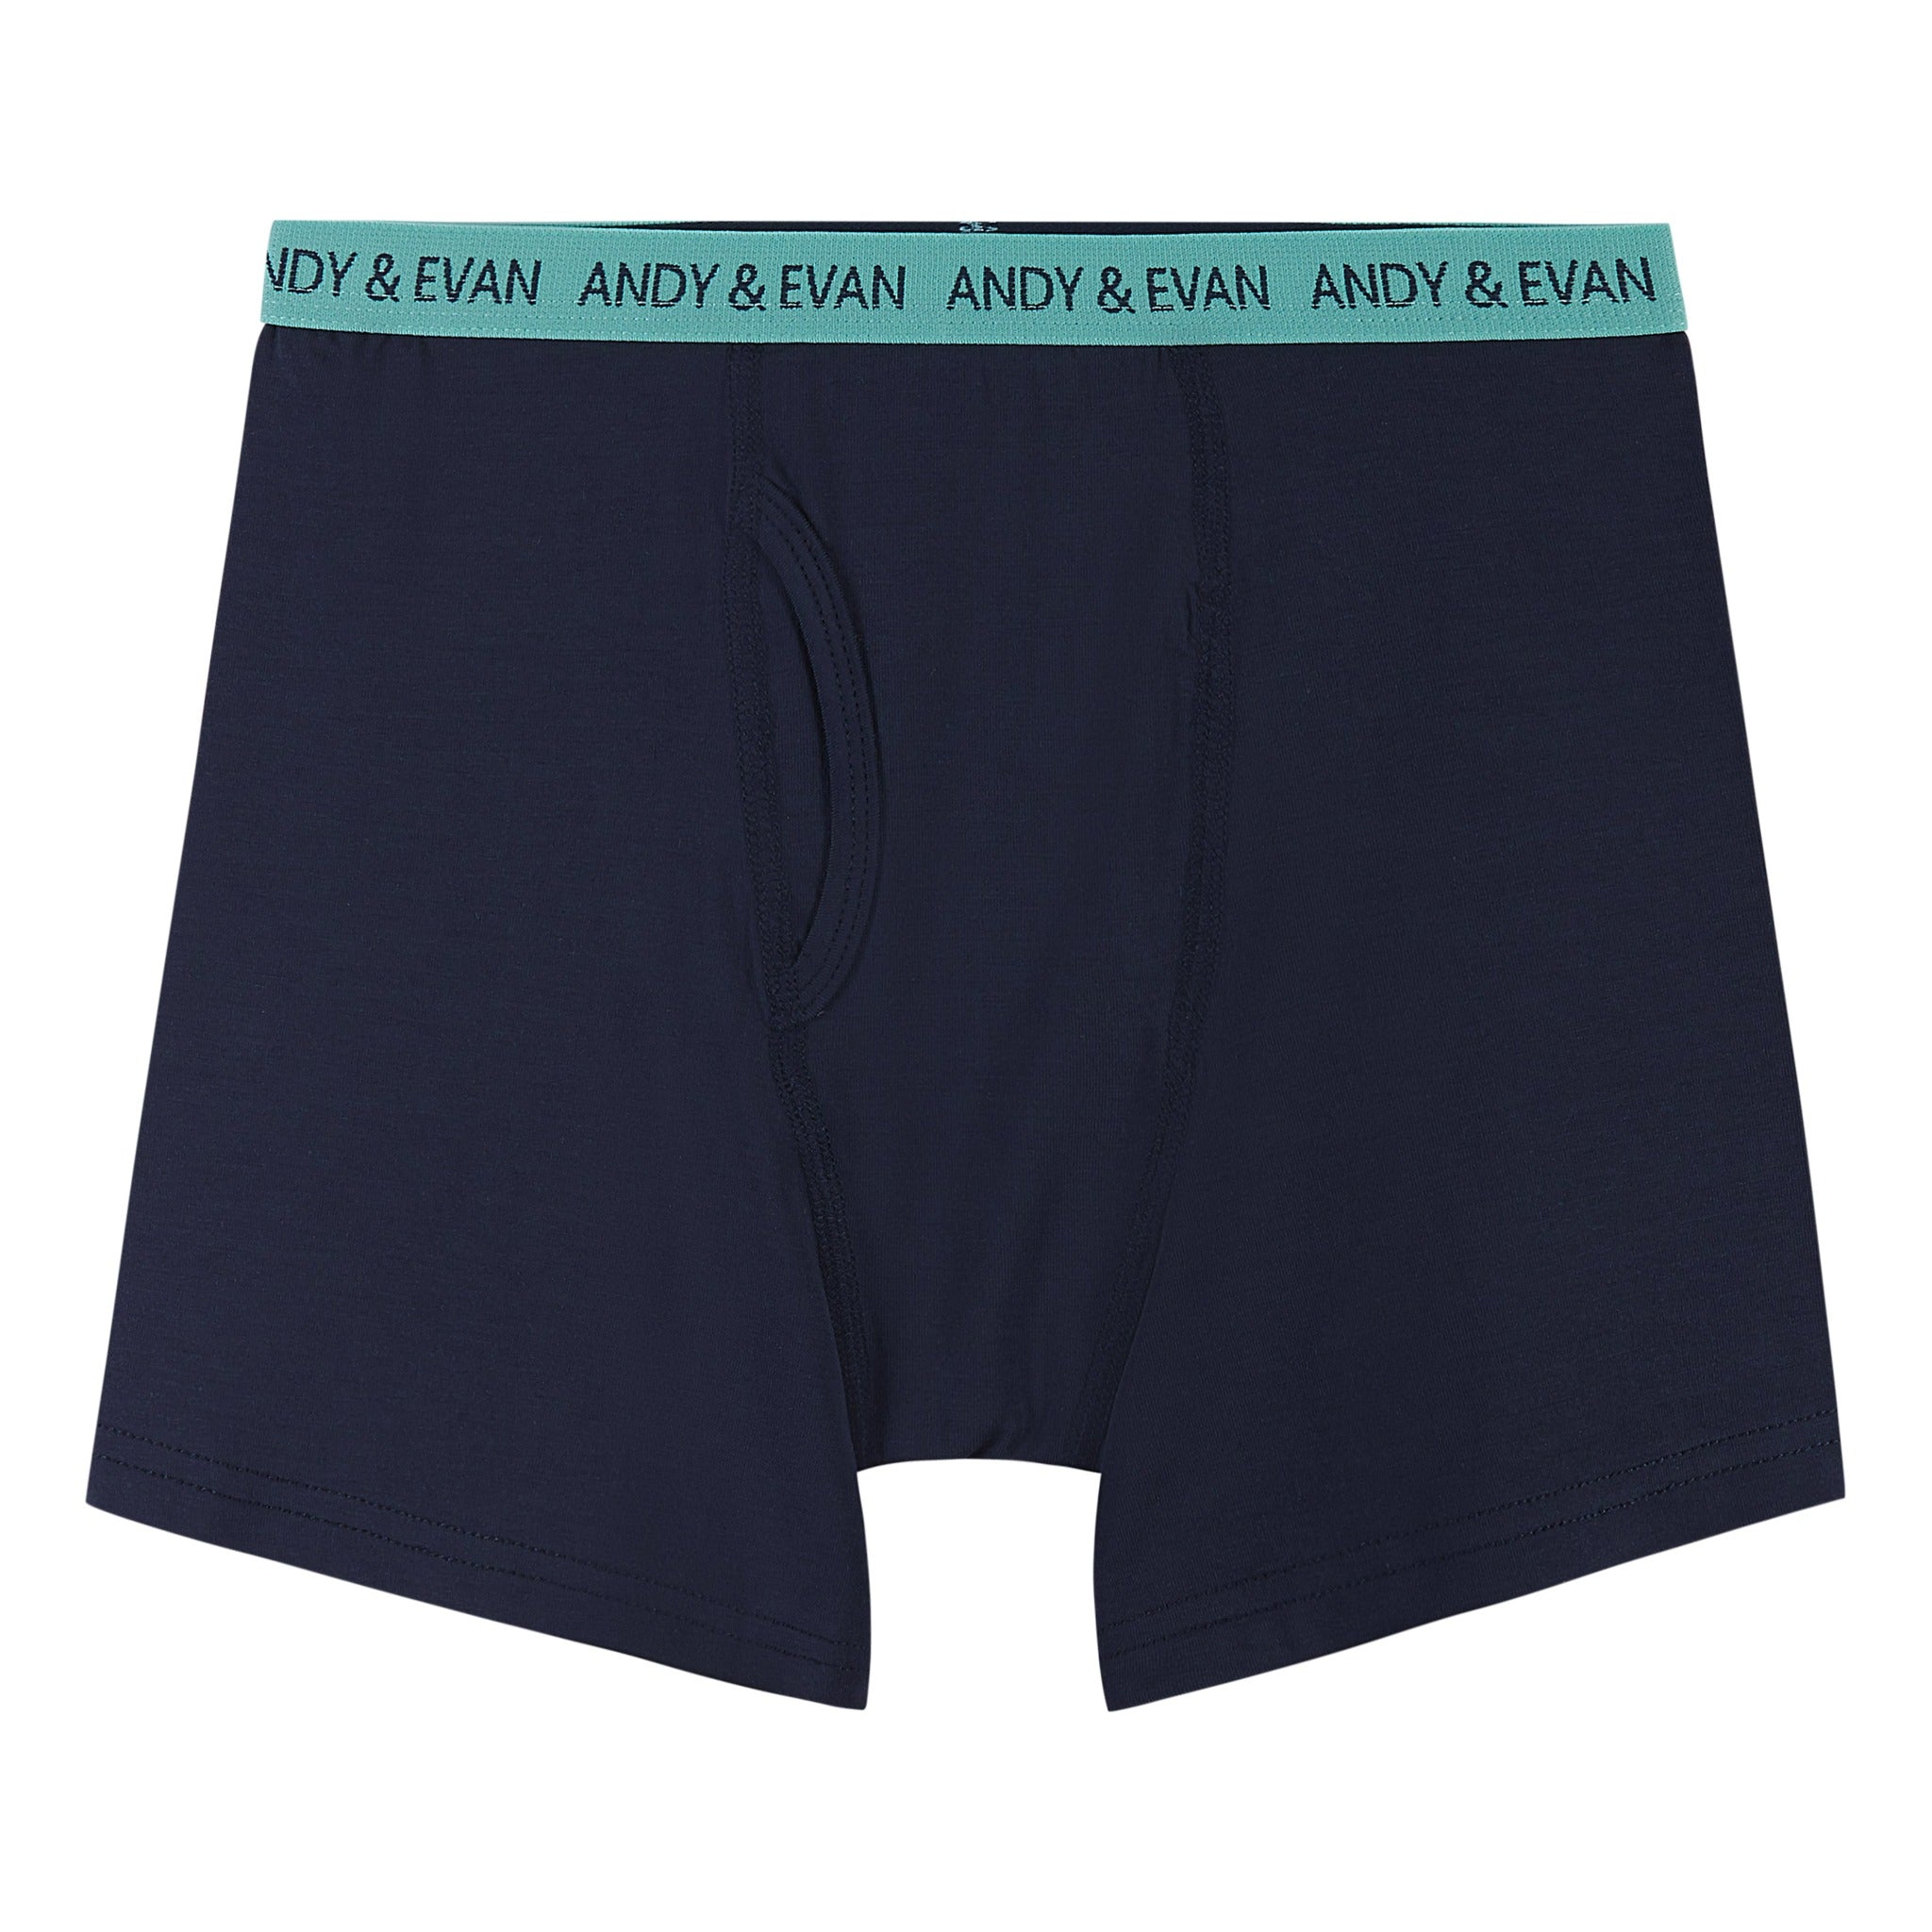 The Boy Pack Boxer Briefs, Soft & rad underwear for your boys